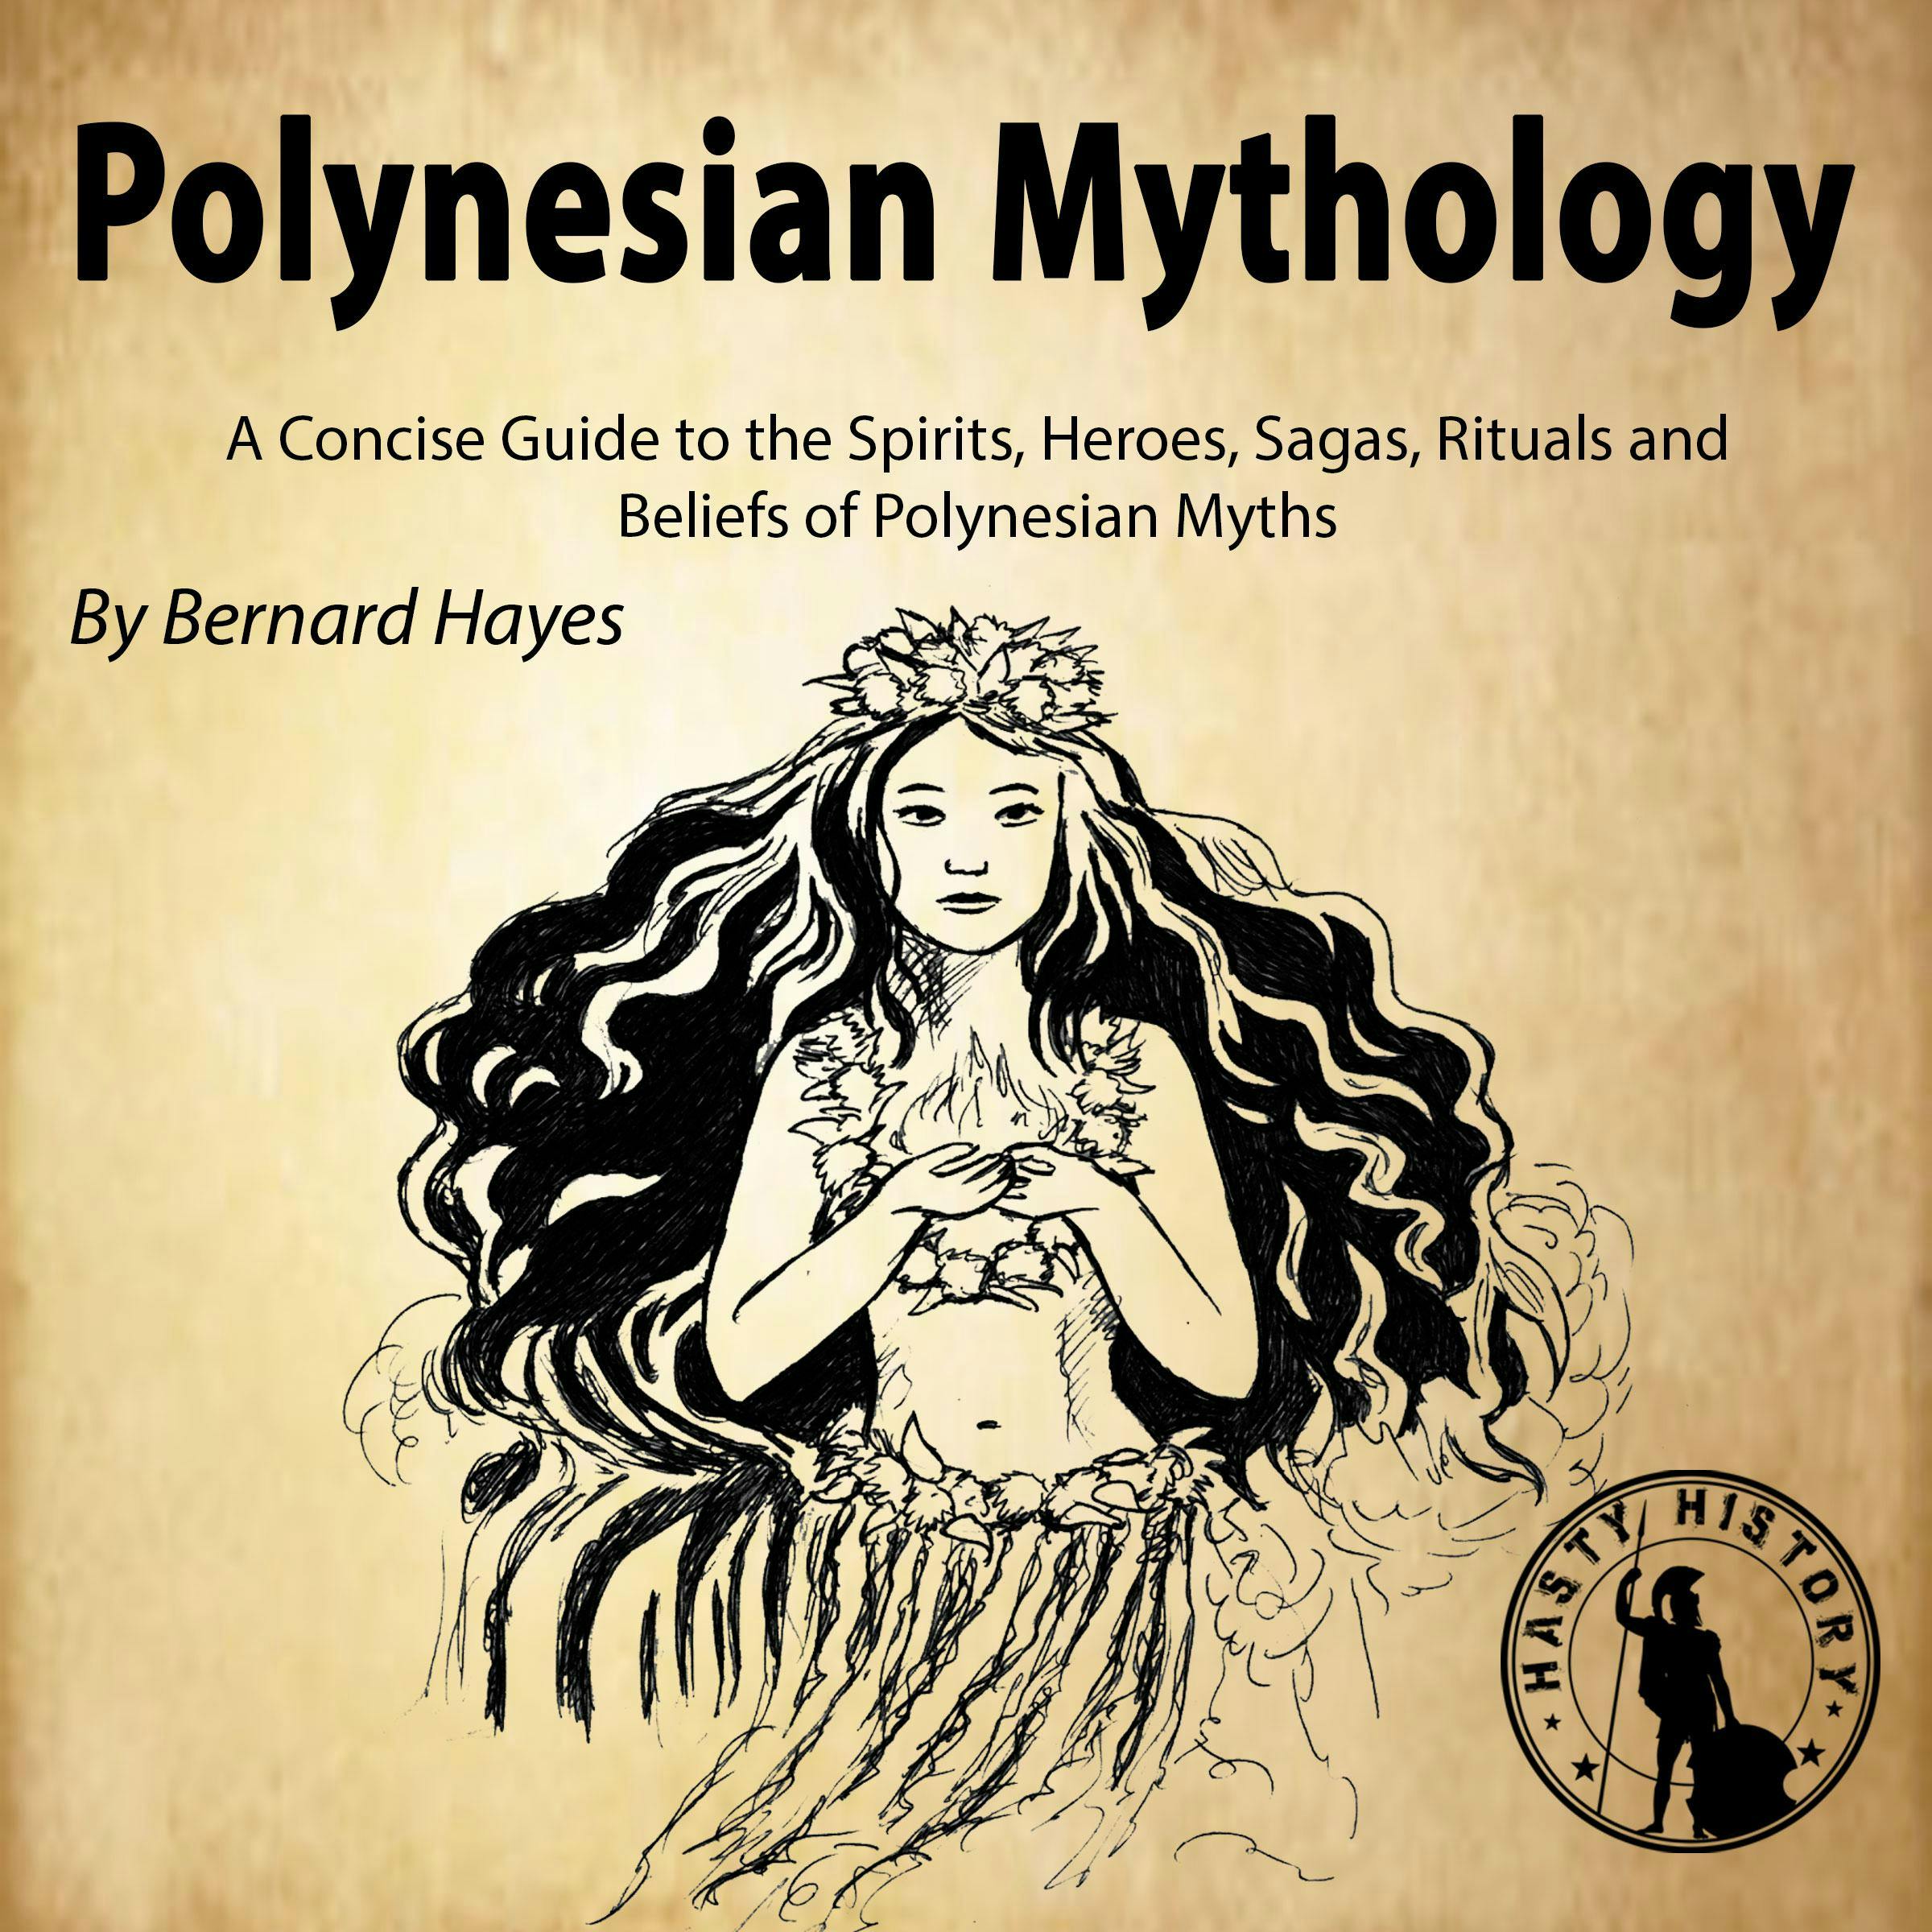 Polynesian Mythology: A Concise Guide to the Gods, Heroes, Sagas, Rituals and Beliefs of Polynesian Myths - Bernard Hayes